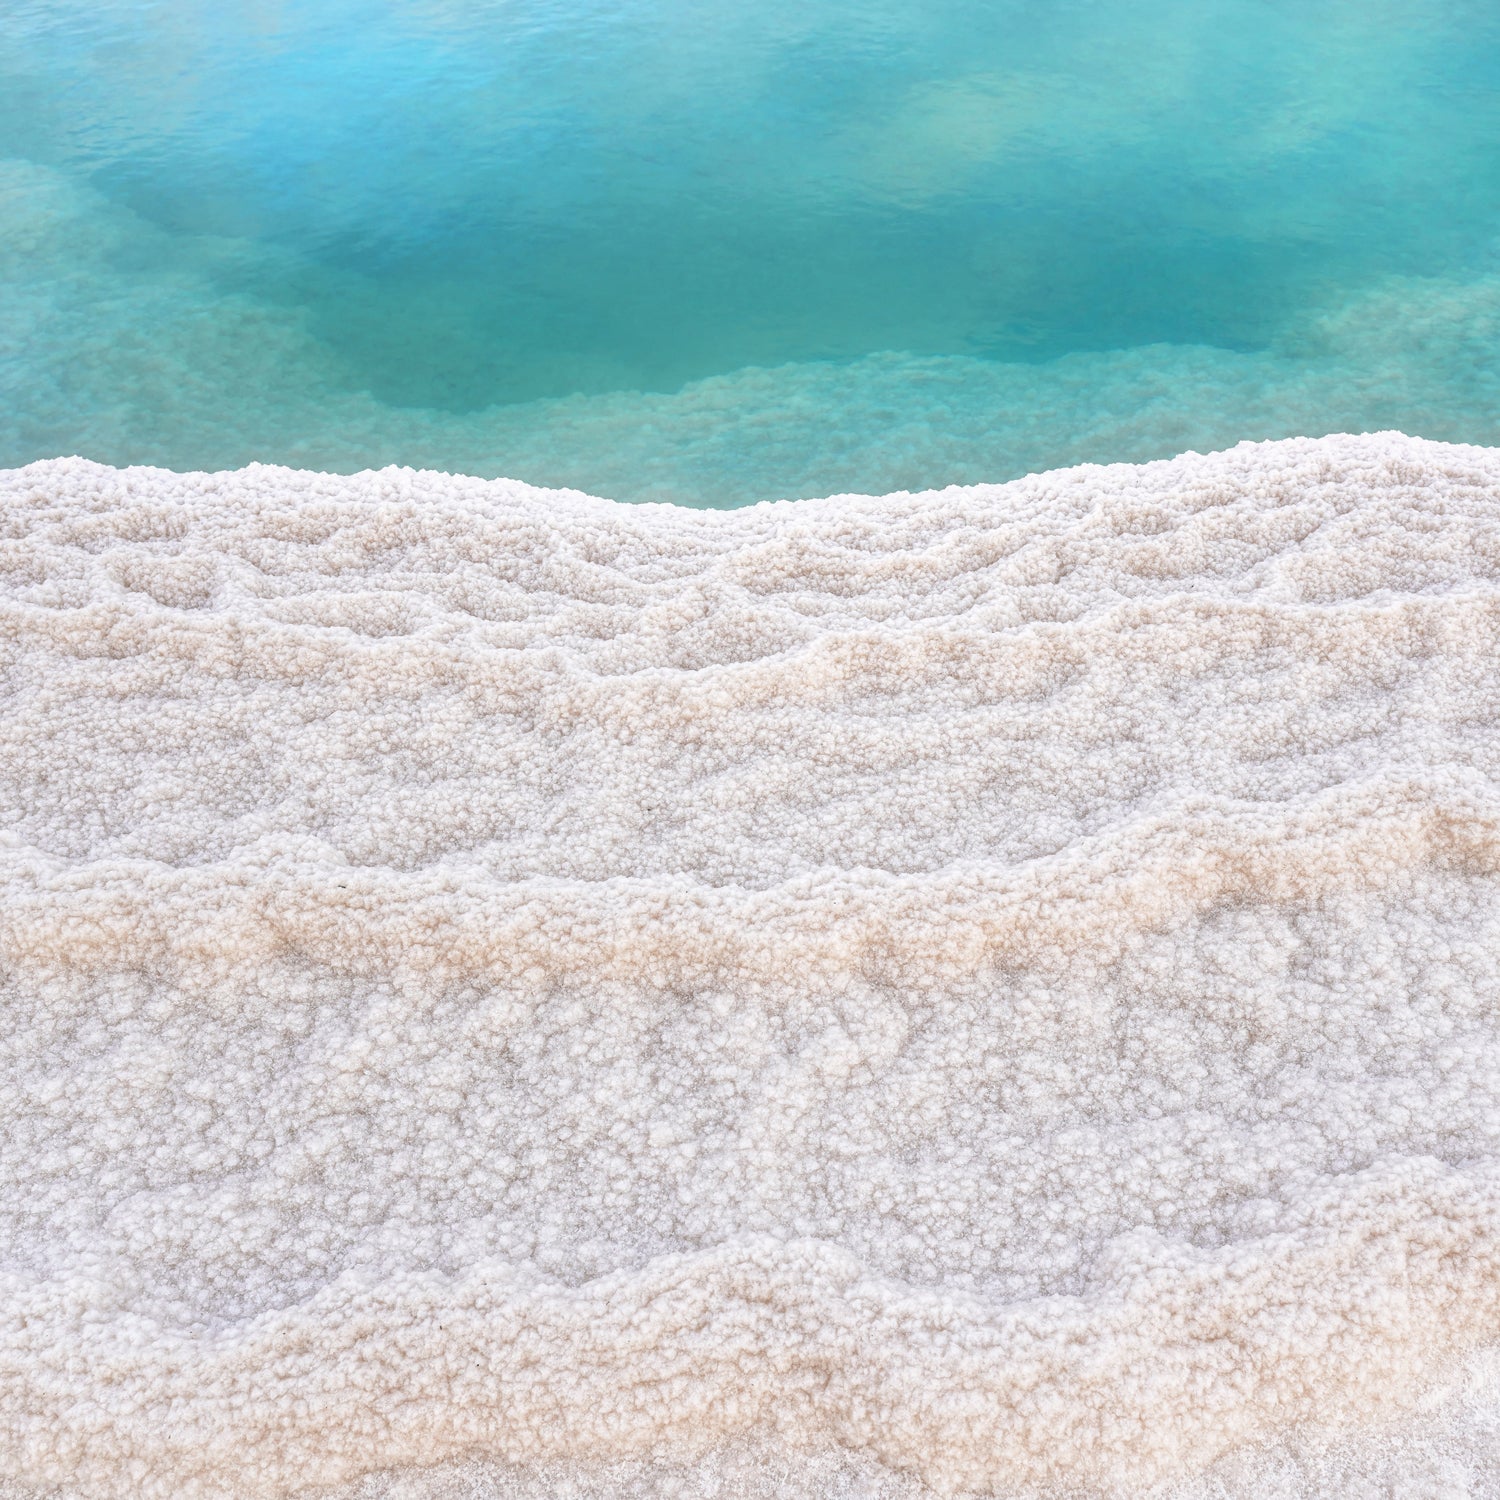 Sea and sand - inspiration for our Cabana fragrancemelt